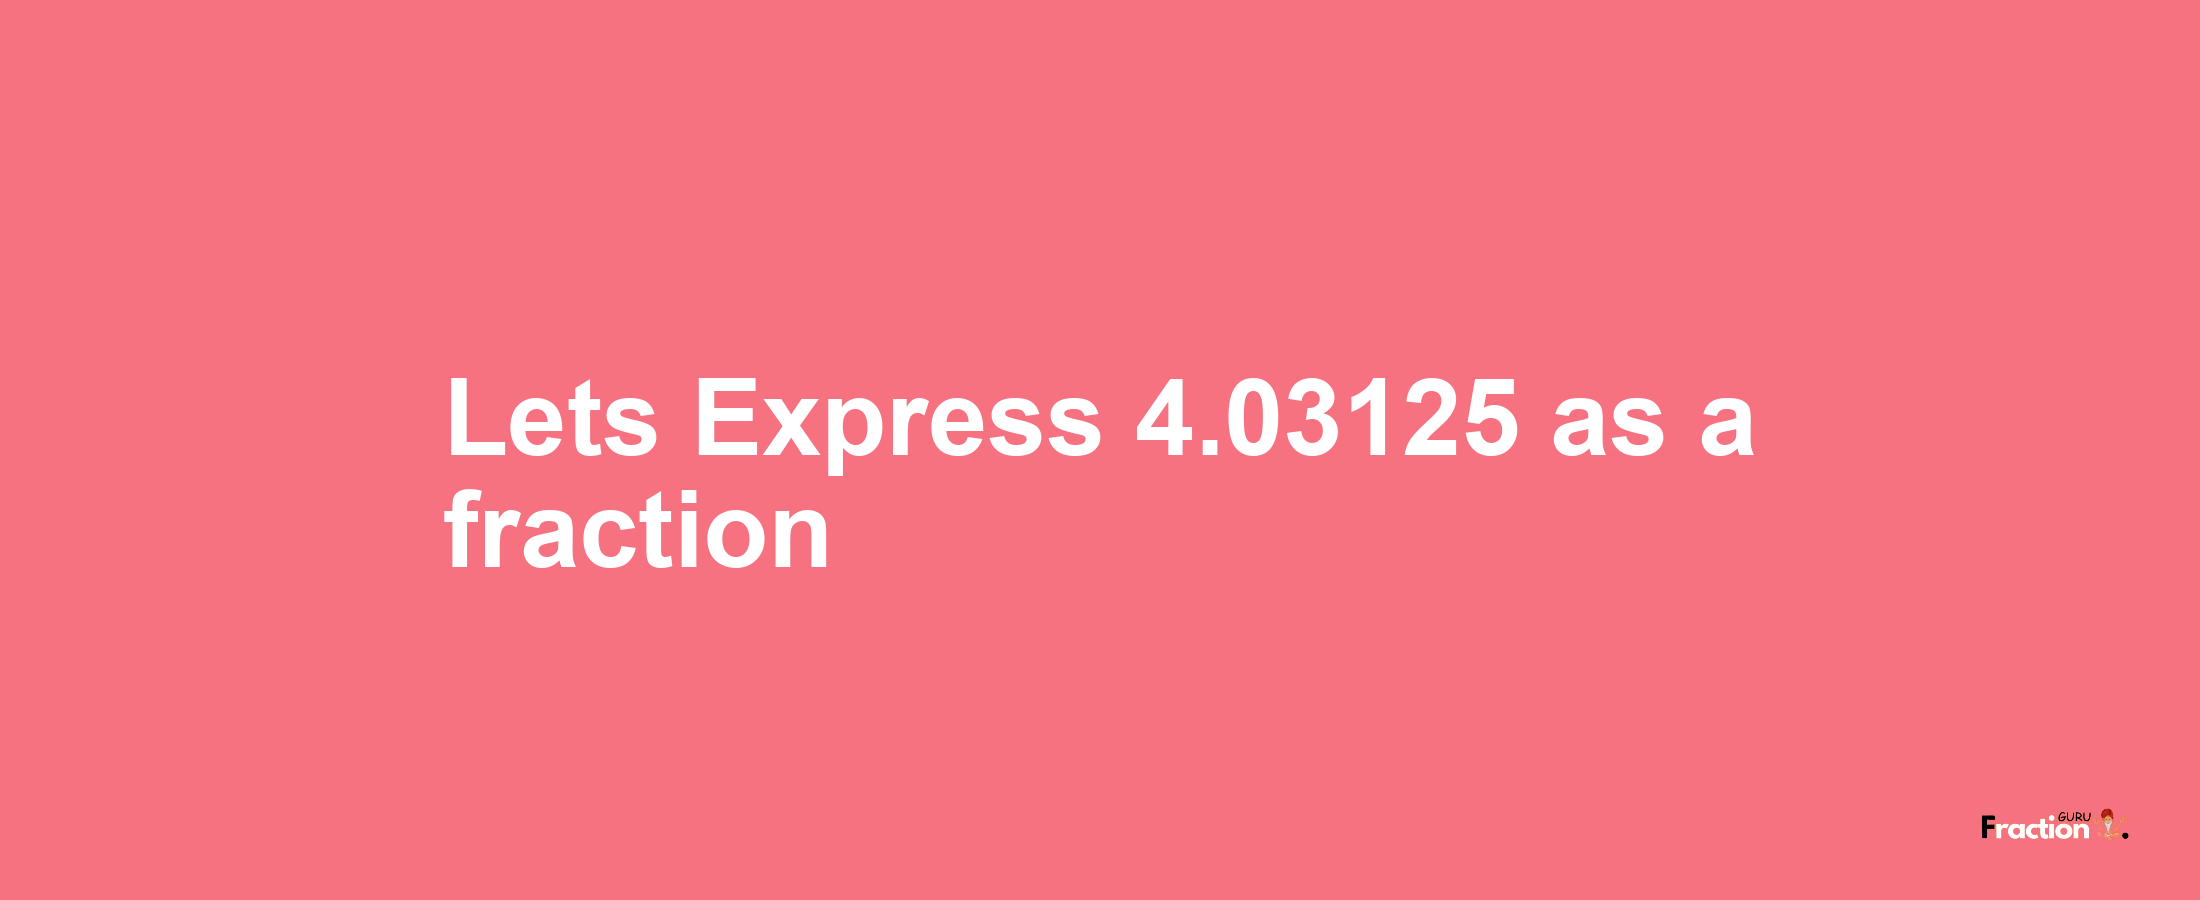 Lets Express 4.03125 as afraction